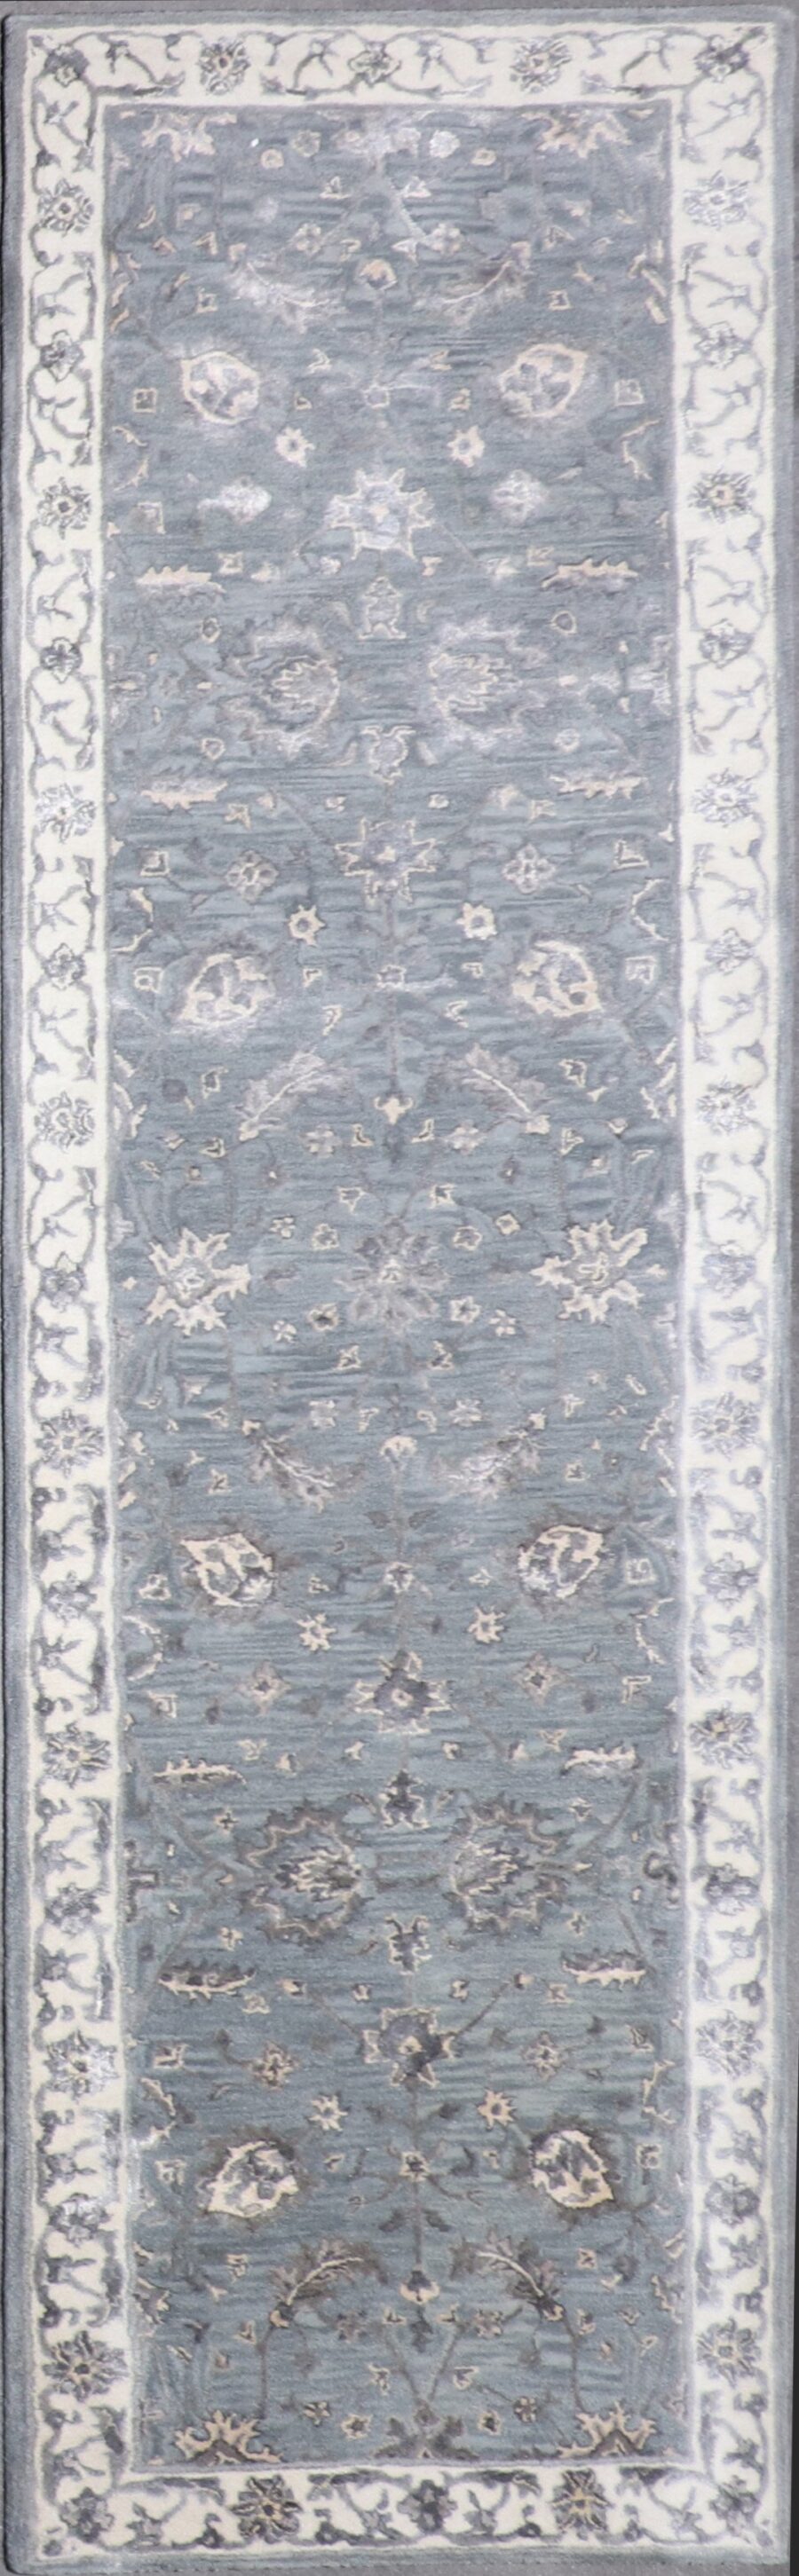 2'10"x10' Decorative Vintage Wool & Silk Hand-Tufted Rug - Direct Rug Import | Rugs in Chicago, Indiana,South Bend,Granger